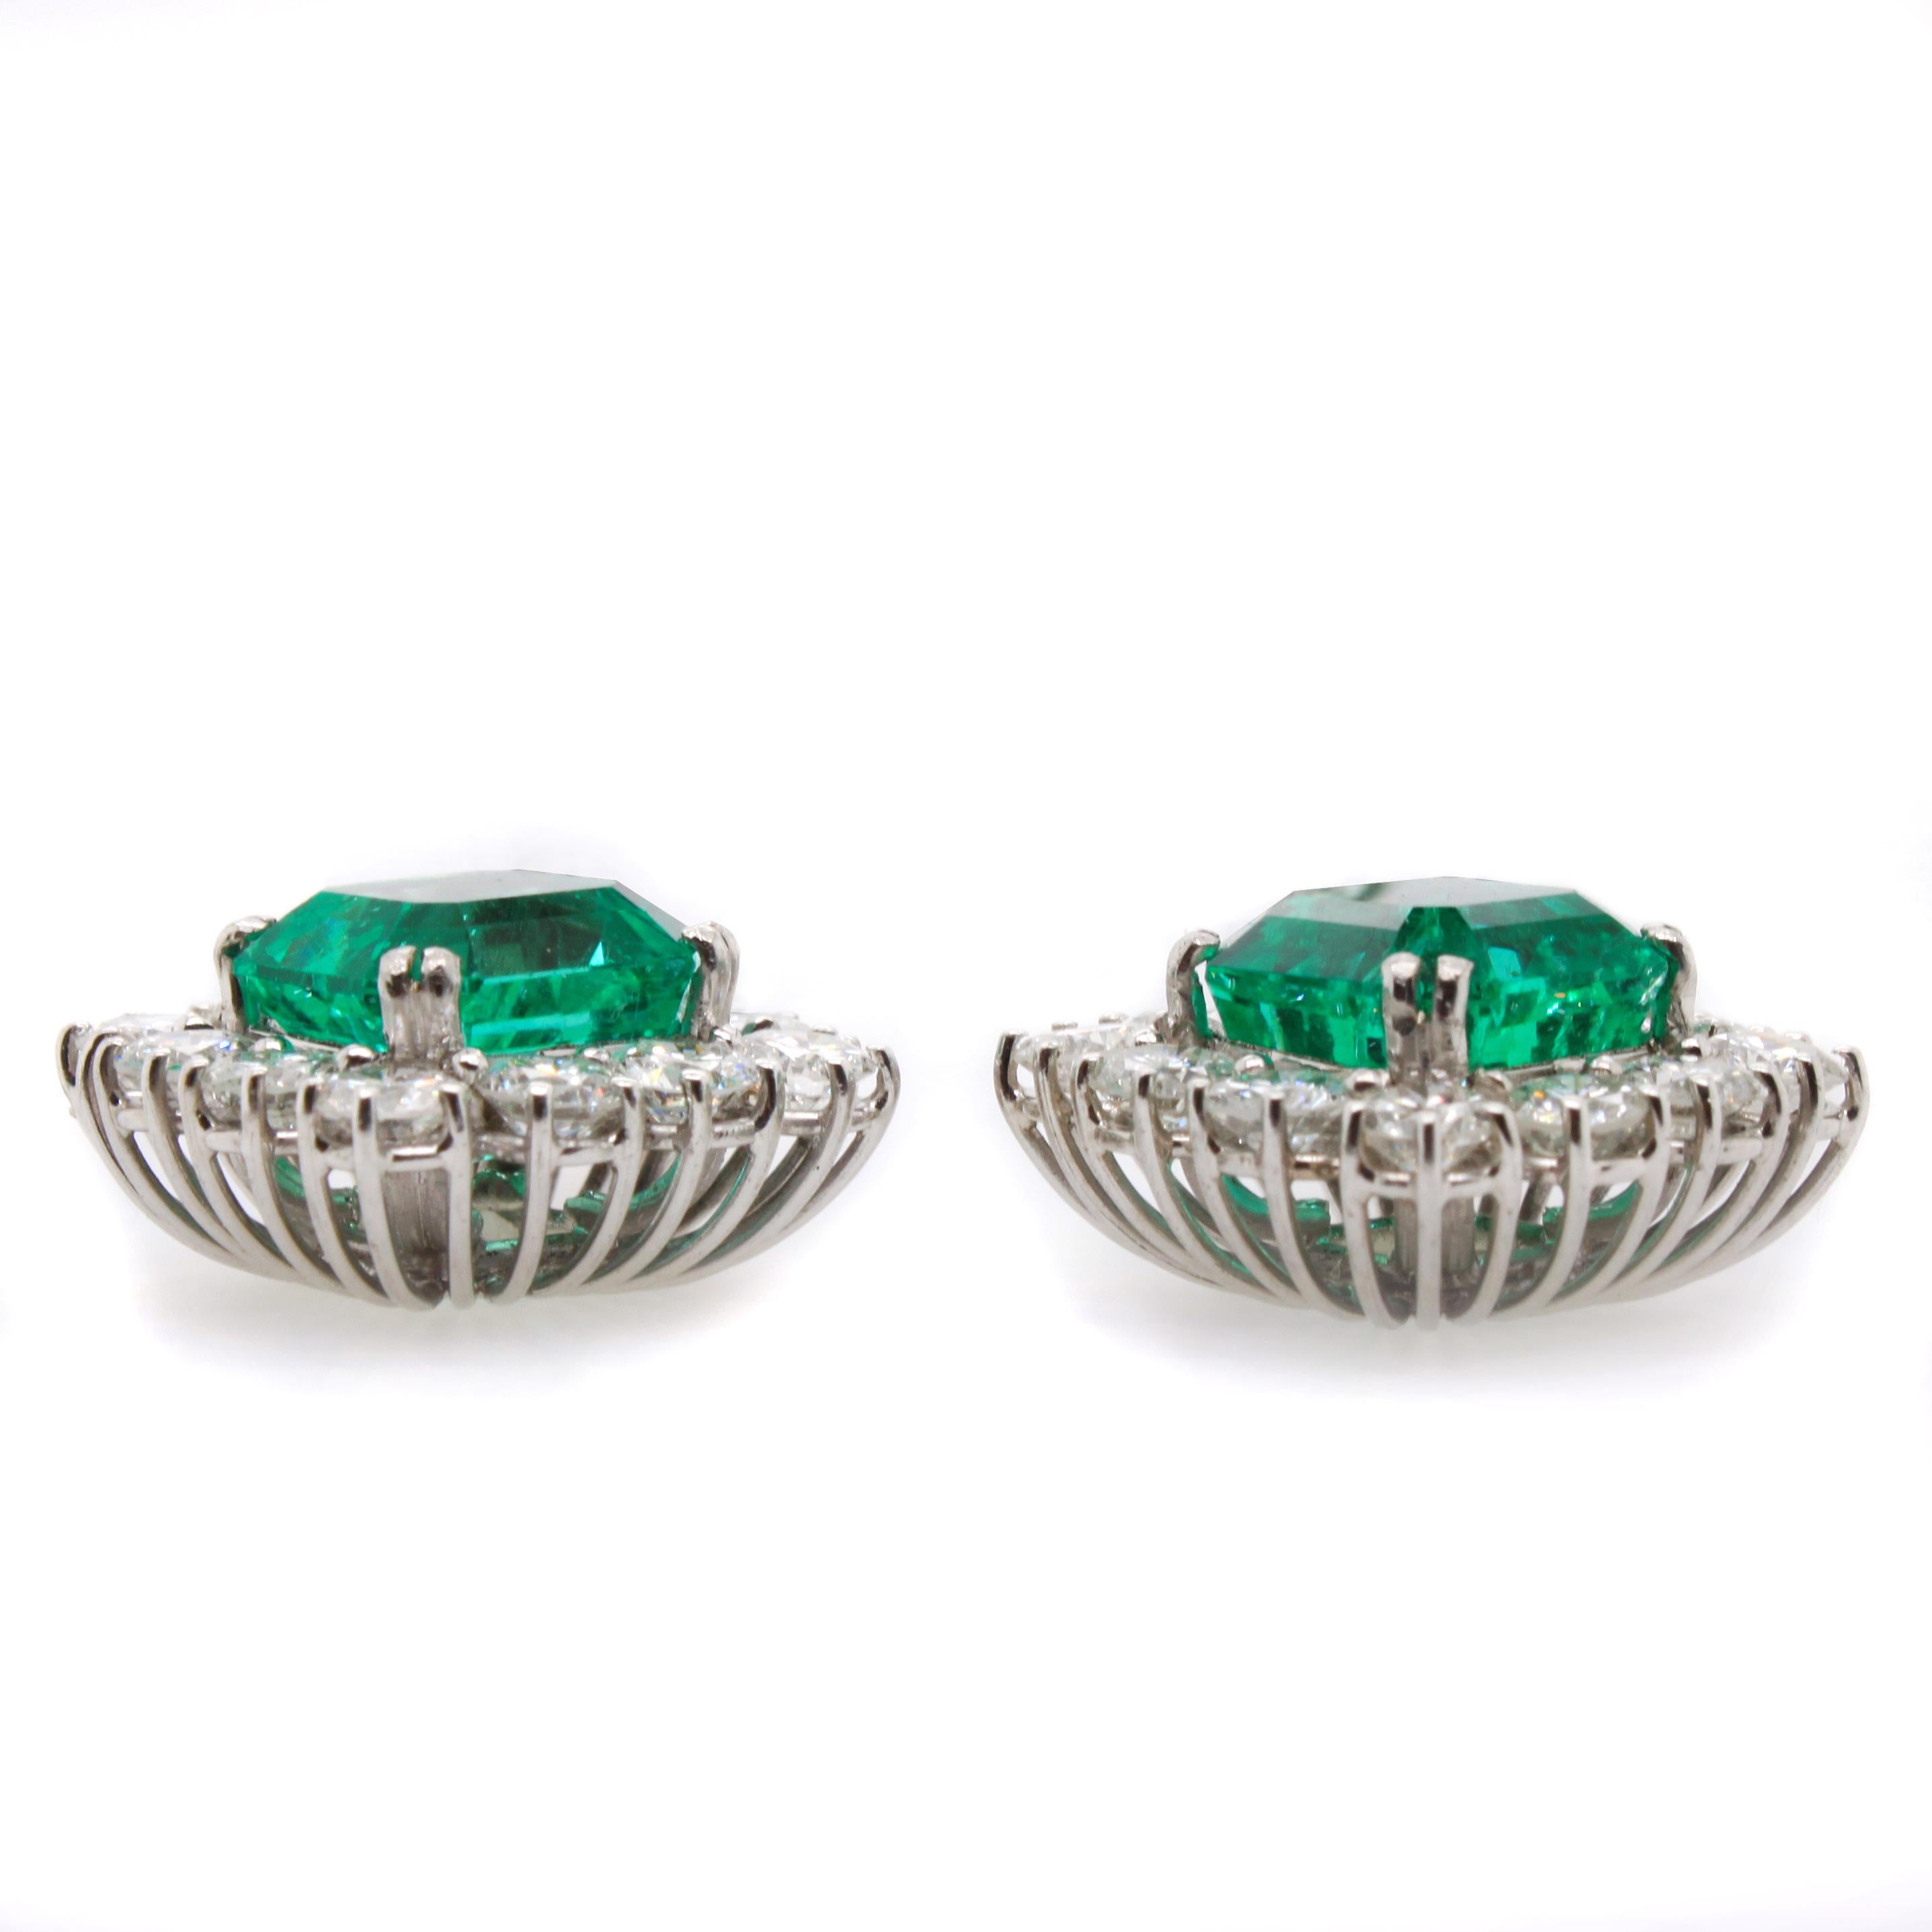 A pair of beautiful emerald and diamond earrings in white gold. The two square cut emerald have a medium green colour and stunning crystal. They are of Colombian origin and weigh 4.01ct (no-oil) and 4.58ct (minor oil) - accompanied by a gemological